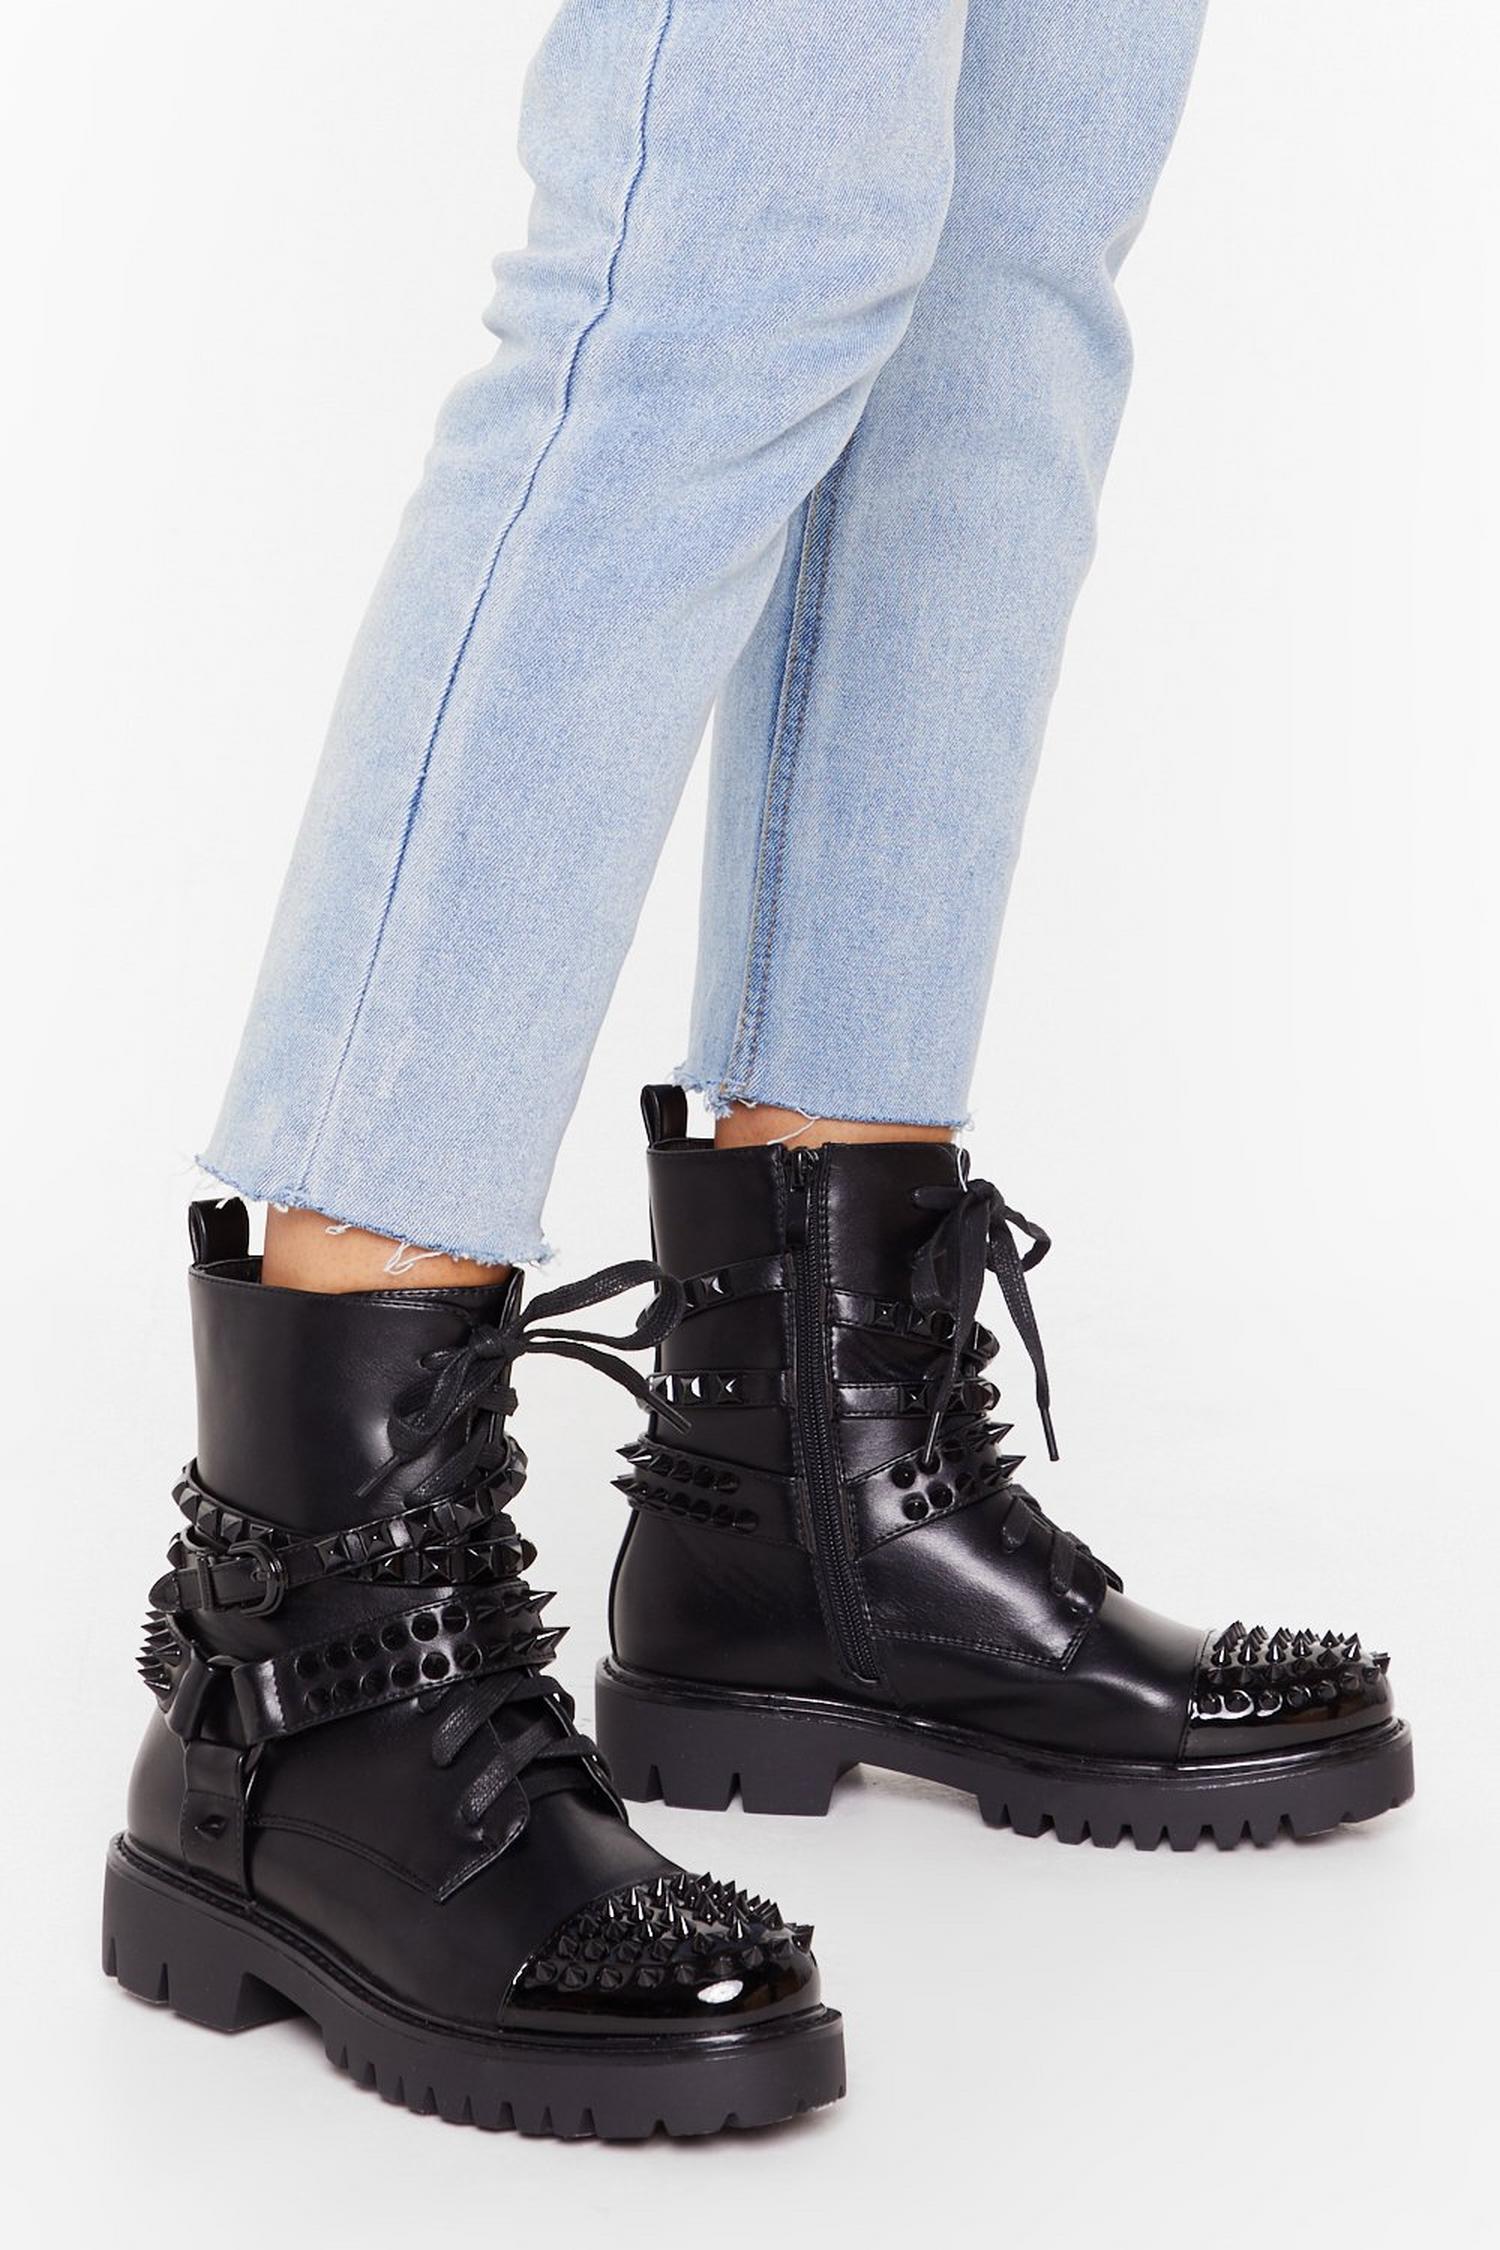 Stud Your Ground Faux Leather Lace-Up Boots